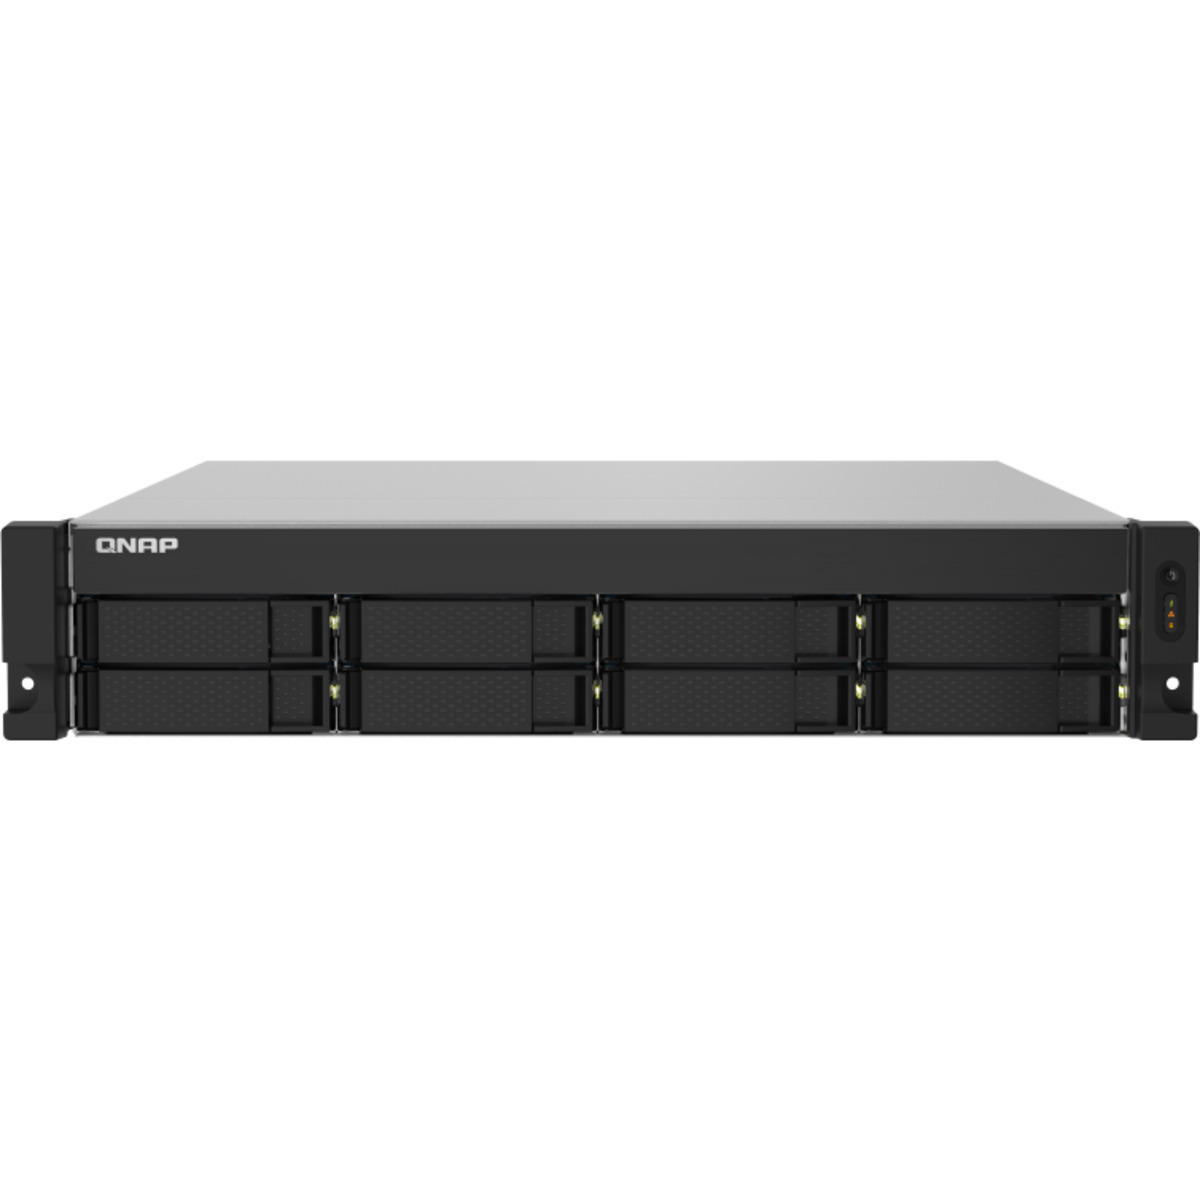 buy $2007 QNAP TS-832PXU-RP 16tb RackMount NAS - Network Attached Storage Device 8x2000gb Seagate BarraCuda ST2000DM008 3.5 7200rpm SATA 6Gb/s HDD CONSUMER Class Drives Installed - Burn-In Tested - ON SALE - nas headquarters buy network attached storage server device das new raid-5 free shipping usa christmas new year holiday sale TS-832PXU-RP